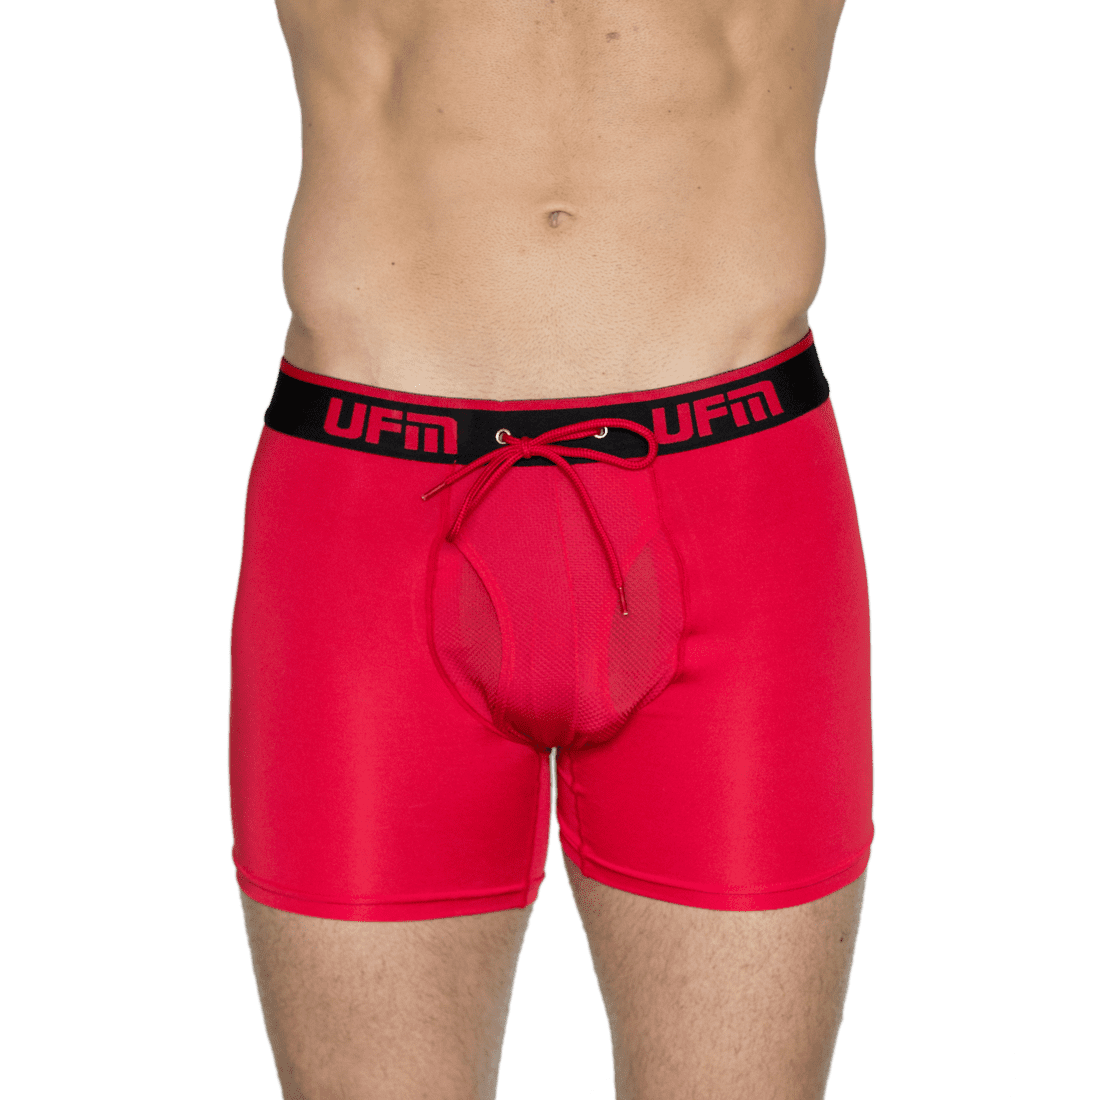 UFM Men's Polyester Trunk w/Patented Adjustable Support Pouch Underwear for  Men Gray 38 